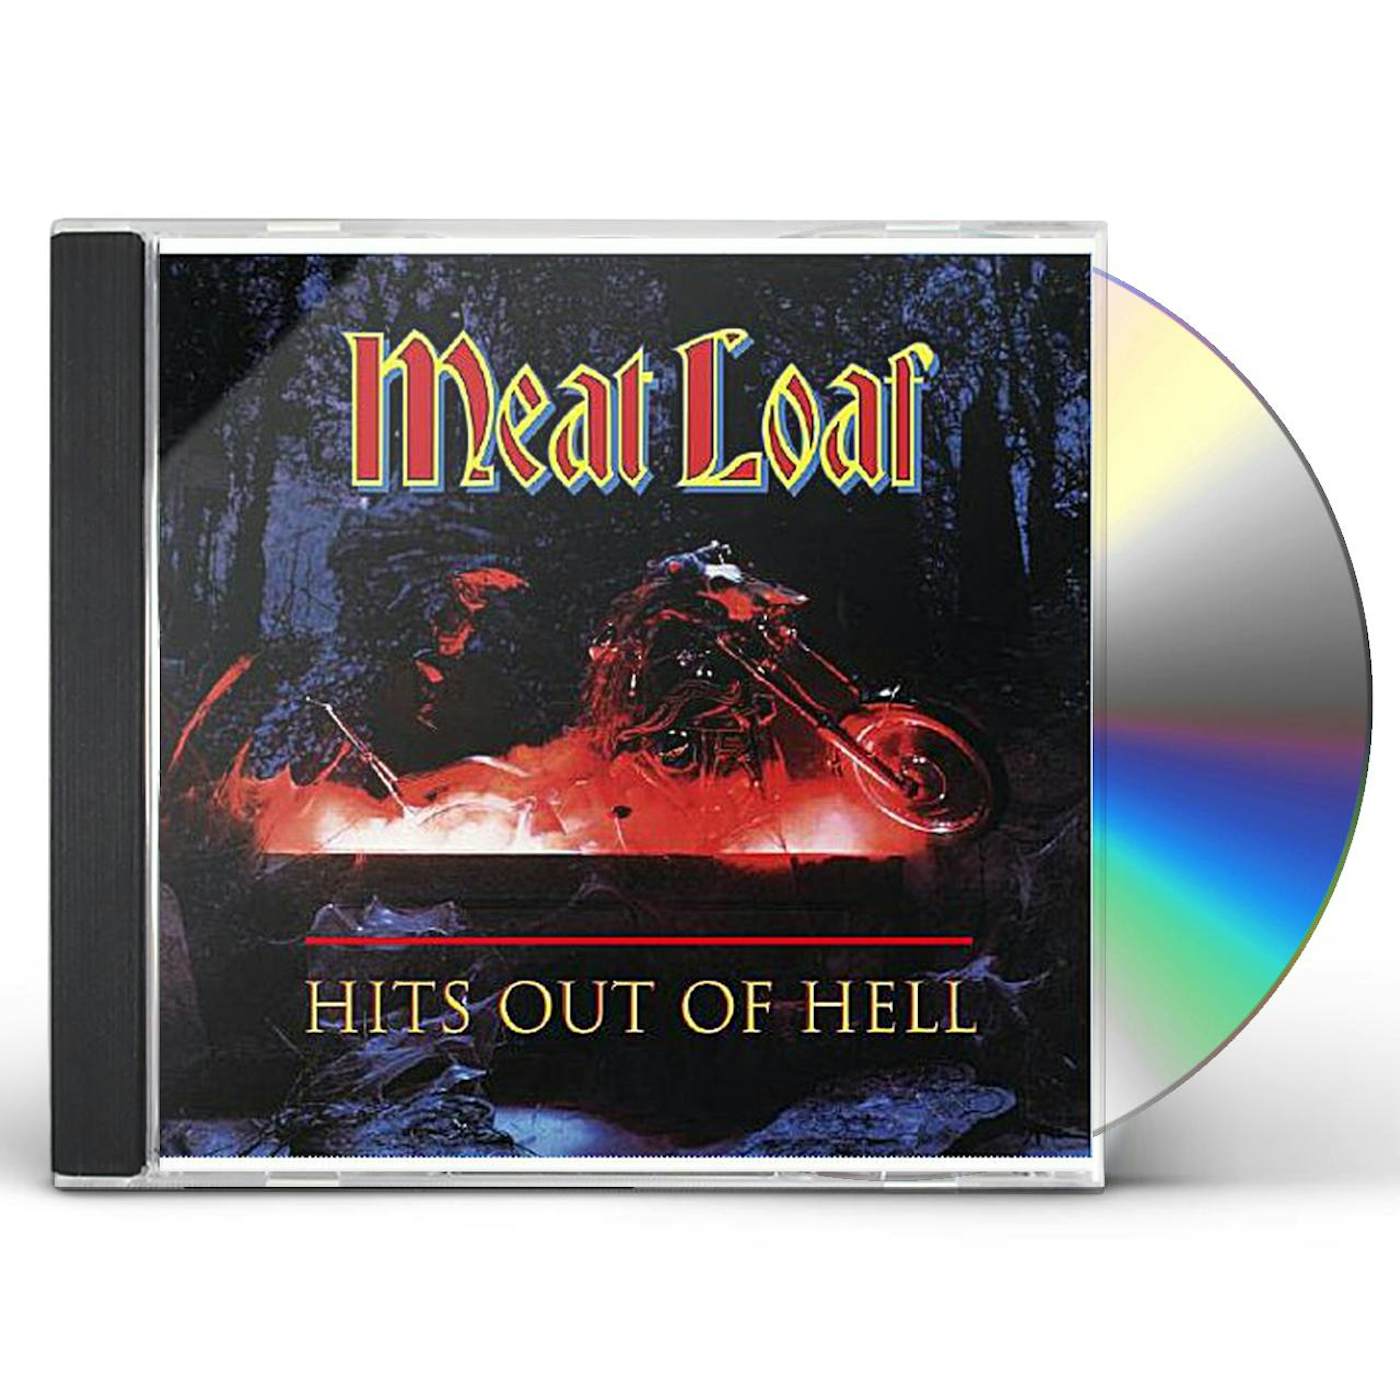 MEAT LOAF: HITS OUT OF HELL CD